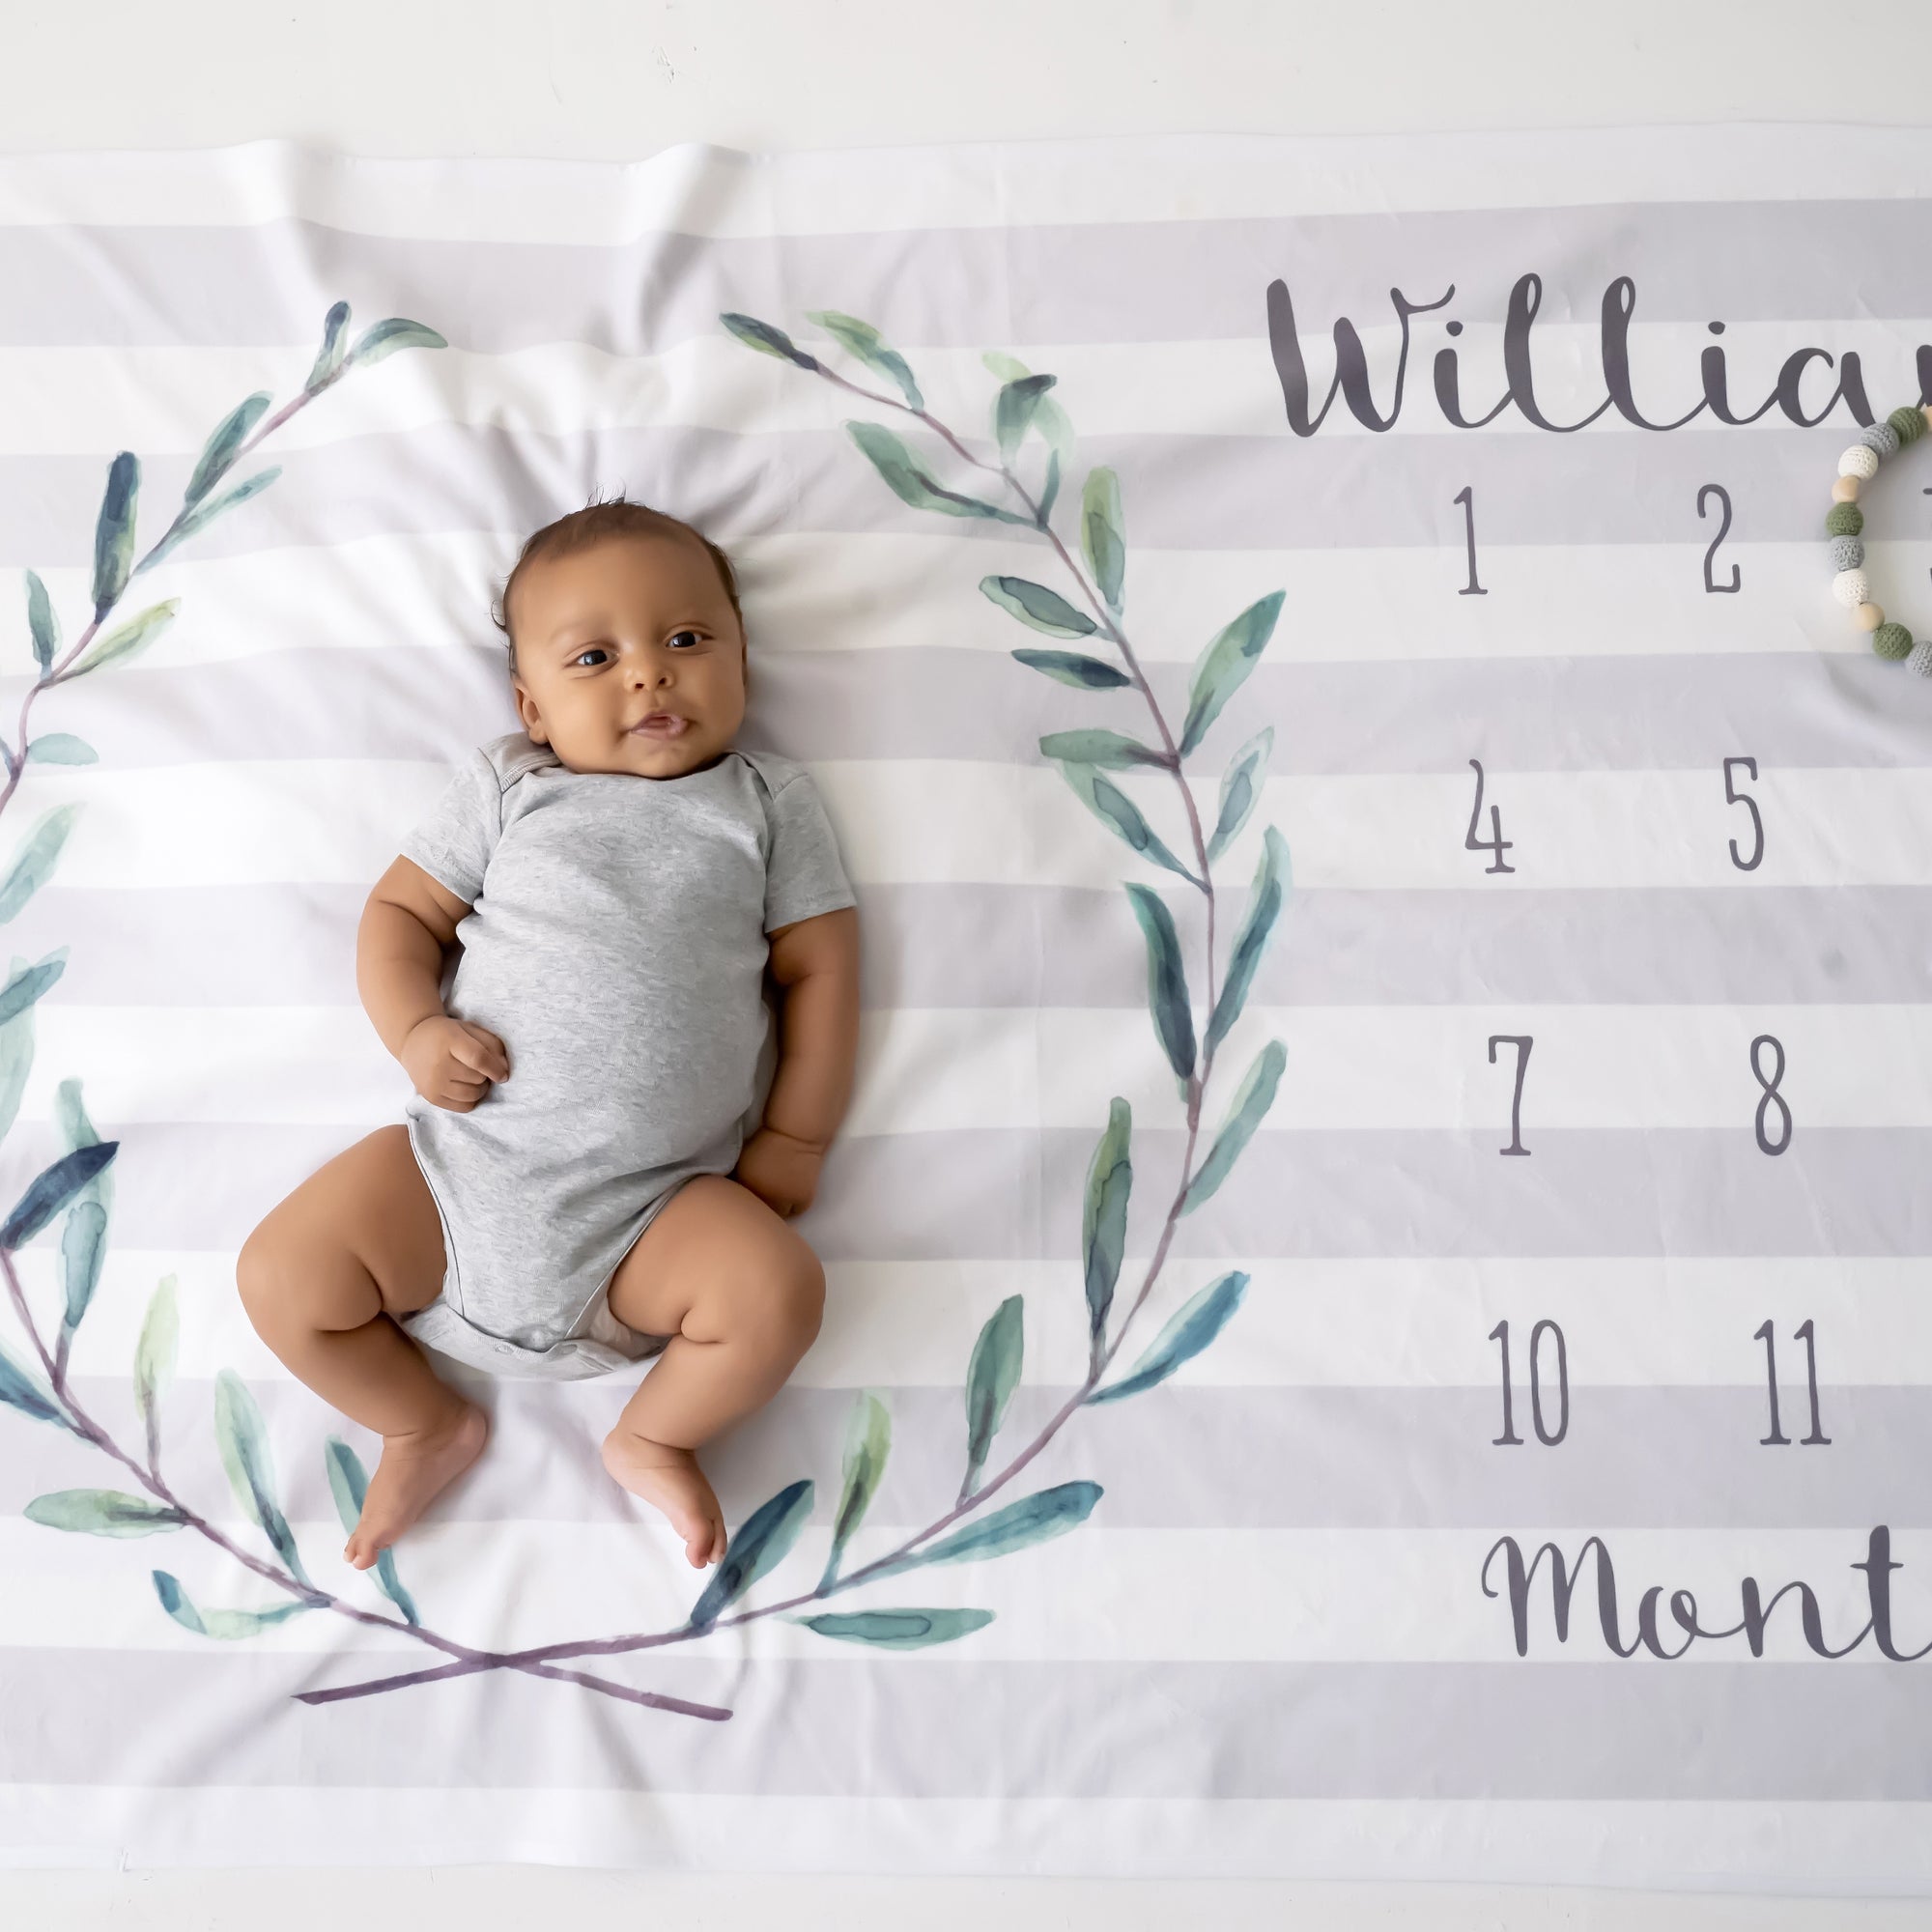 Personalized Milestone Baby Blanket featuring a eucalyptus wreath and soft gray stripes, printed with baby safe inks on a super soft fleece